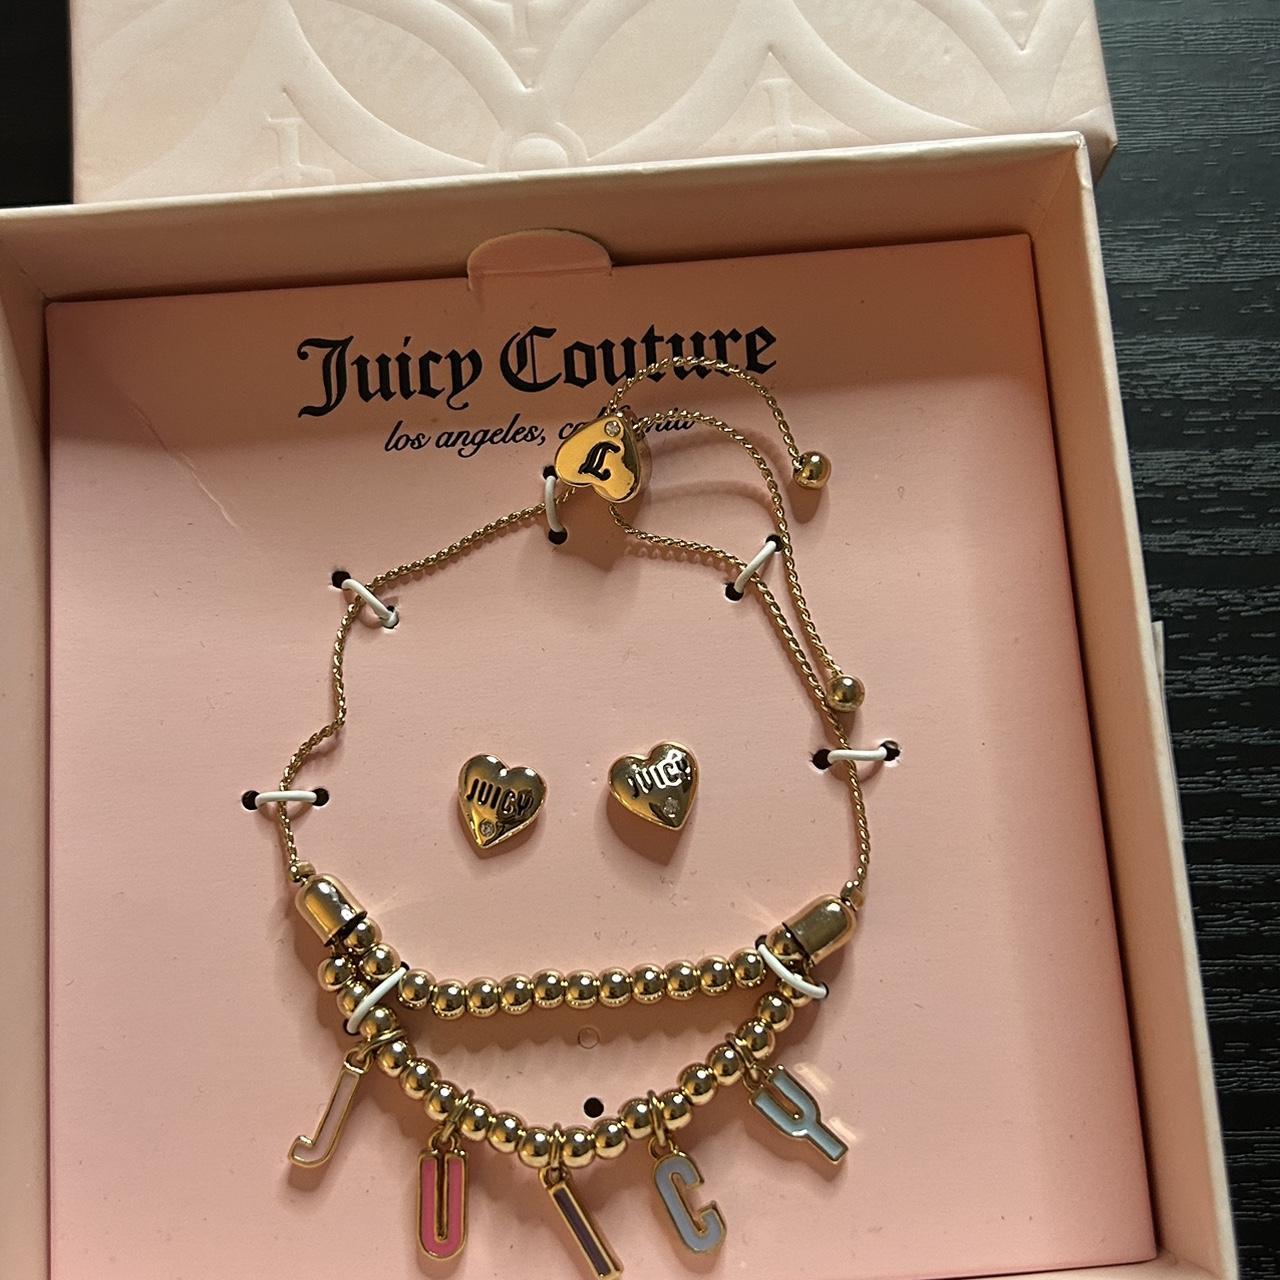 Brand new juicy couture jewelry set with charm - Depop